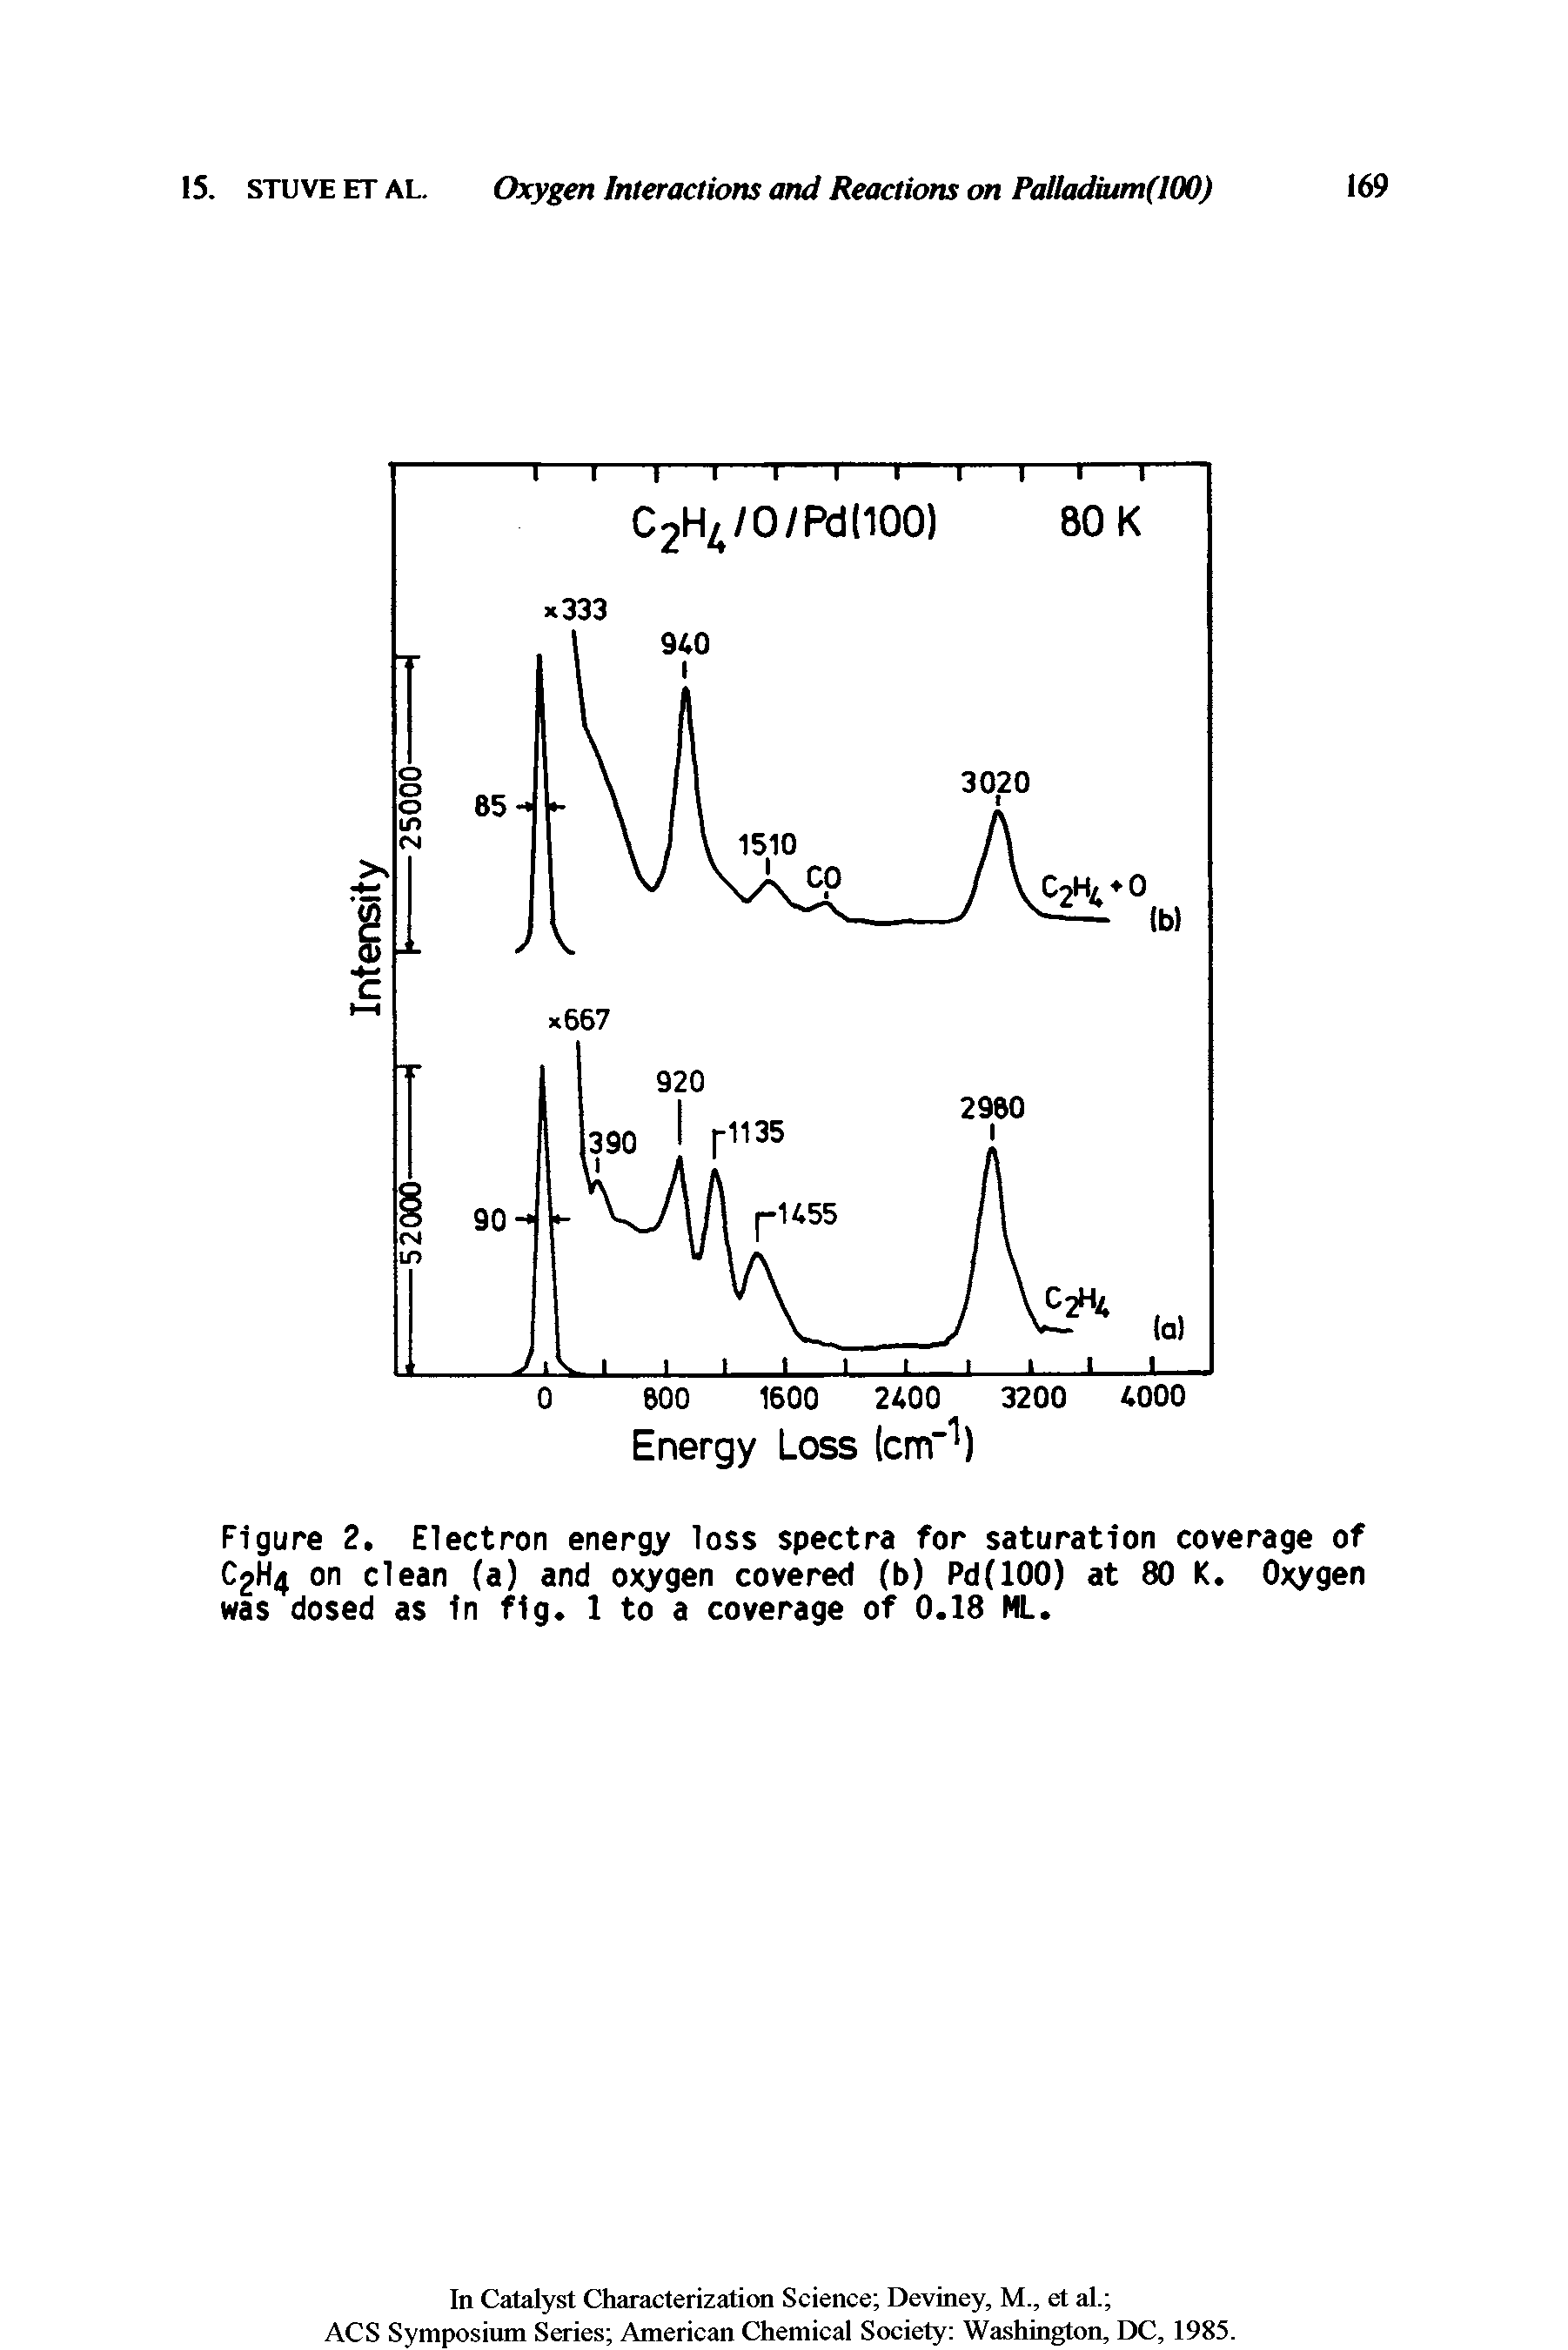 Figure 2. Electron energy loss spectra for saturation coverage of C2H4 on clean (a) and oxygen covered (b) Pd(lOO) at 80 K. Oxygen was dosed as in fig. 1 to a coverage of 0.18 ML.